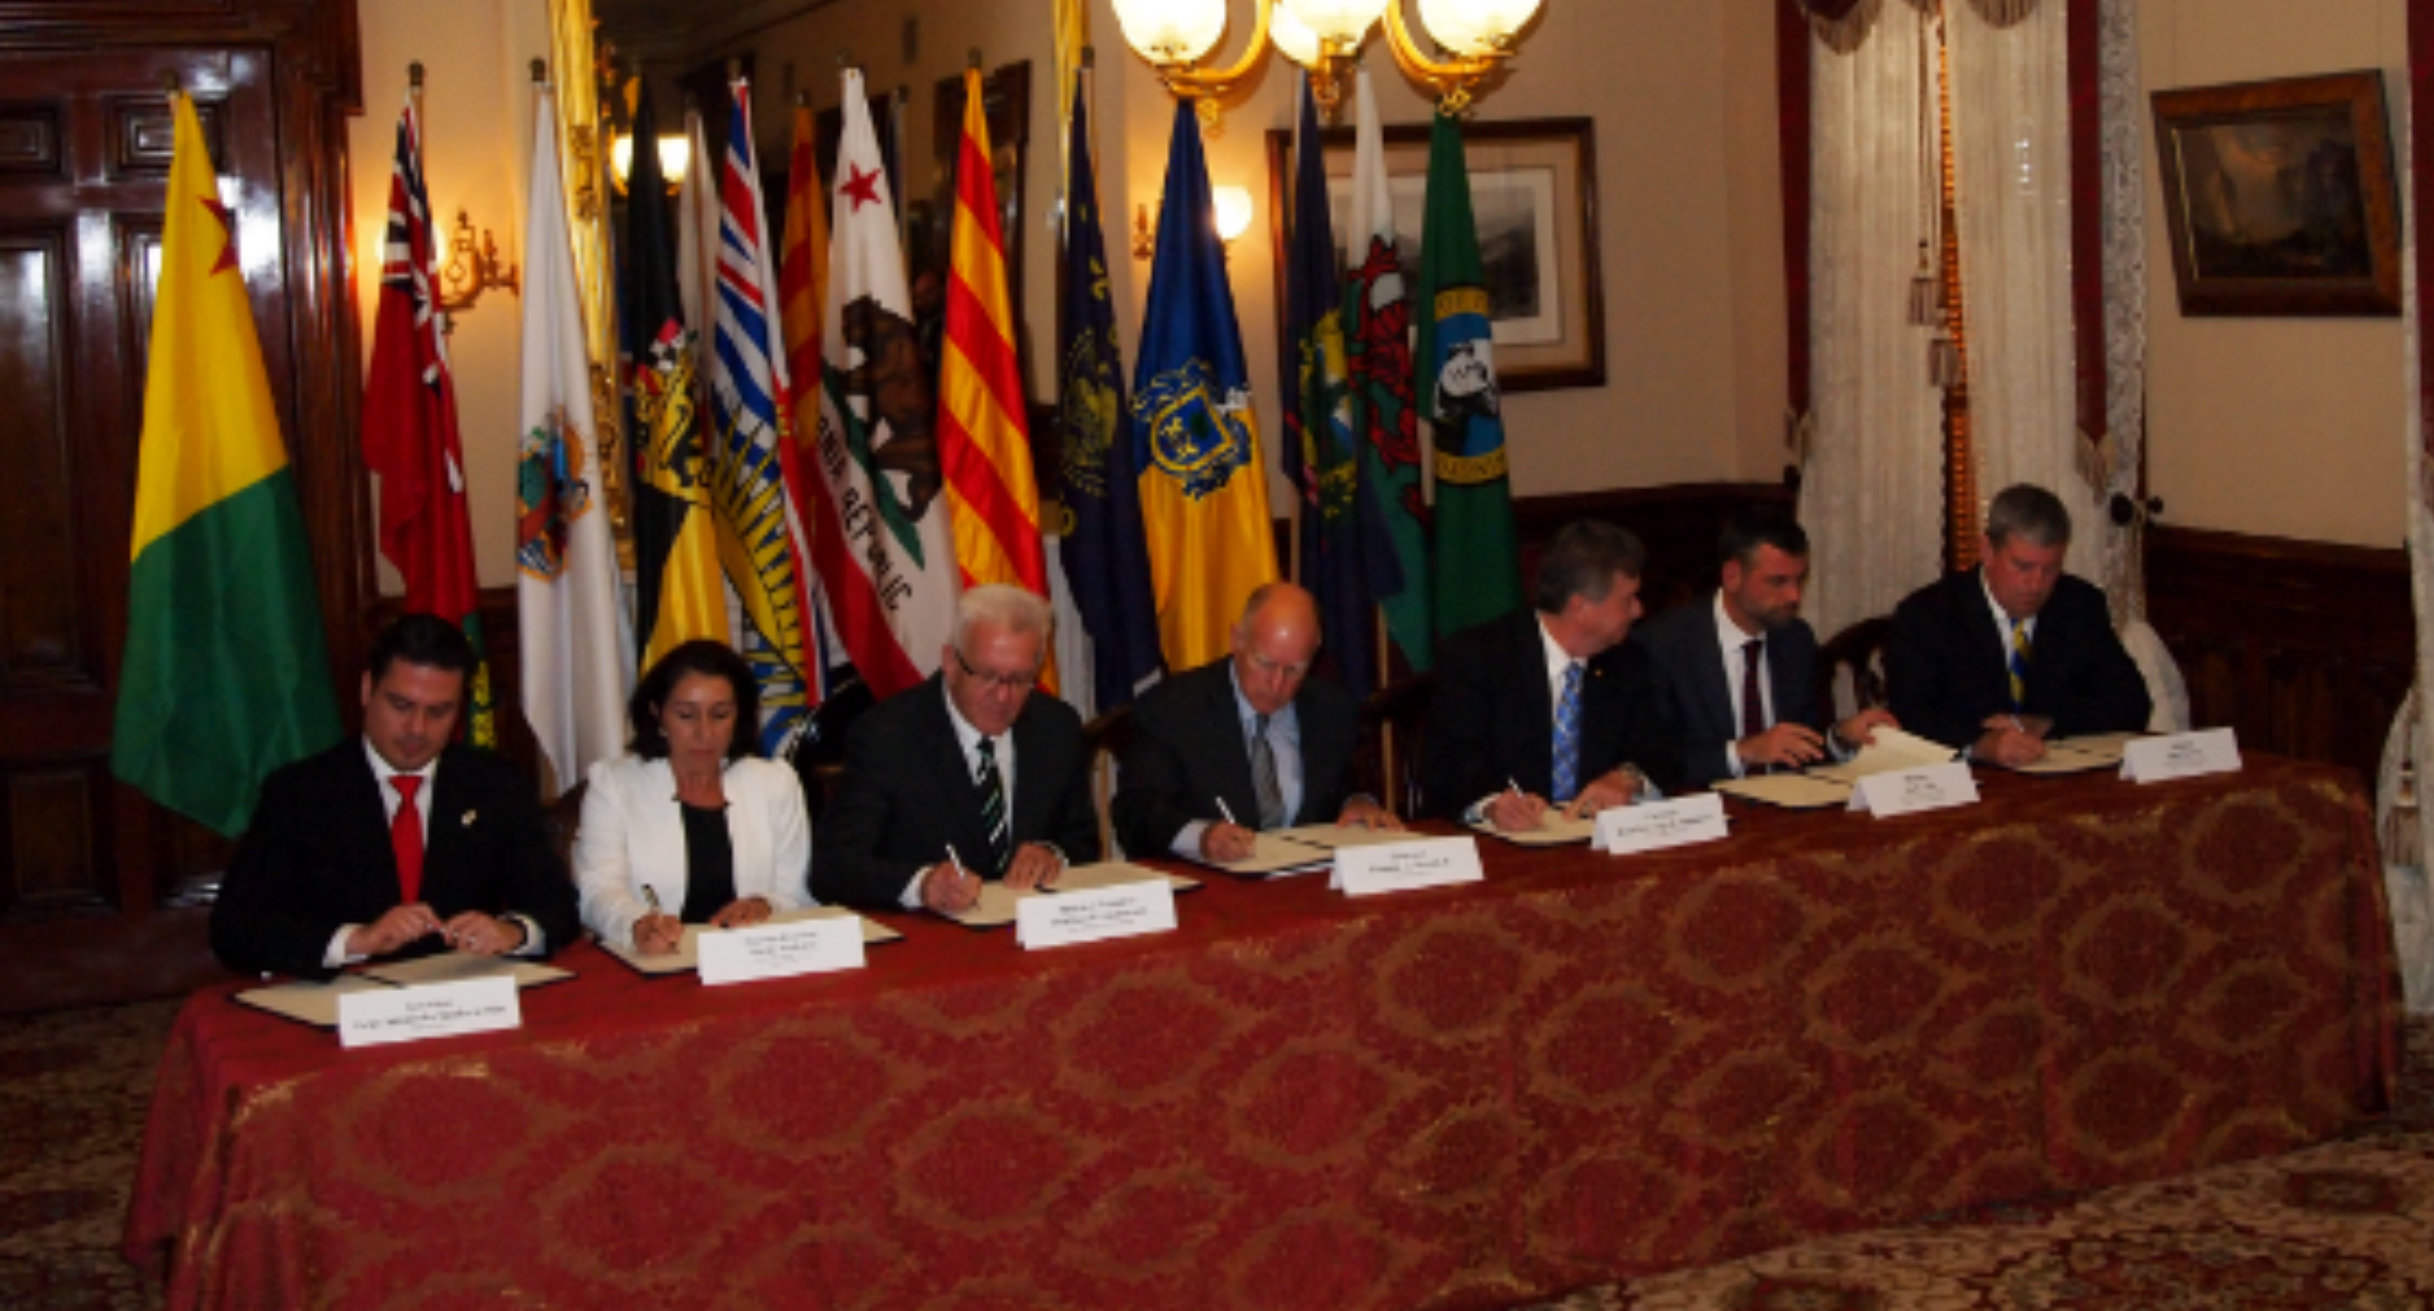 Minister President Winfried Kretschmann (2nd from left), former Governor Jerry Brown (3rd from left) and ten other heads of government are the first members to sign the Under2 MOU in Sacramento and lay the foundation stone for the Under2 Coalition']